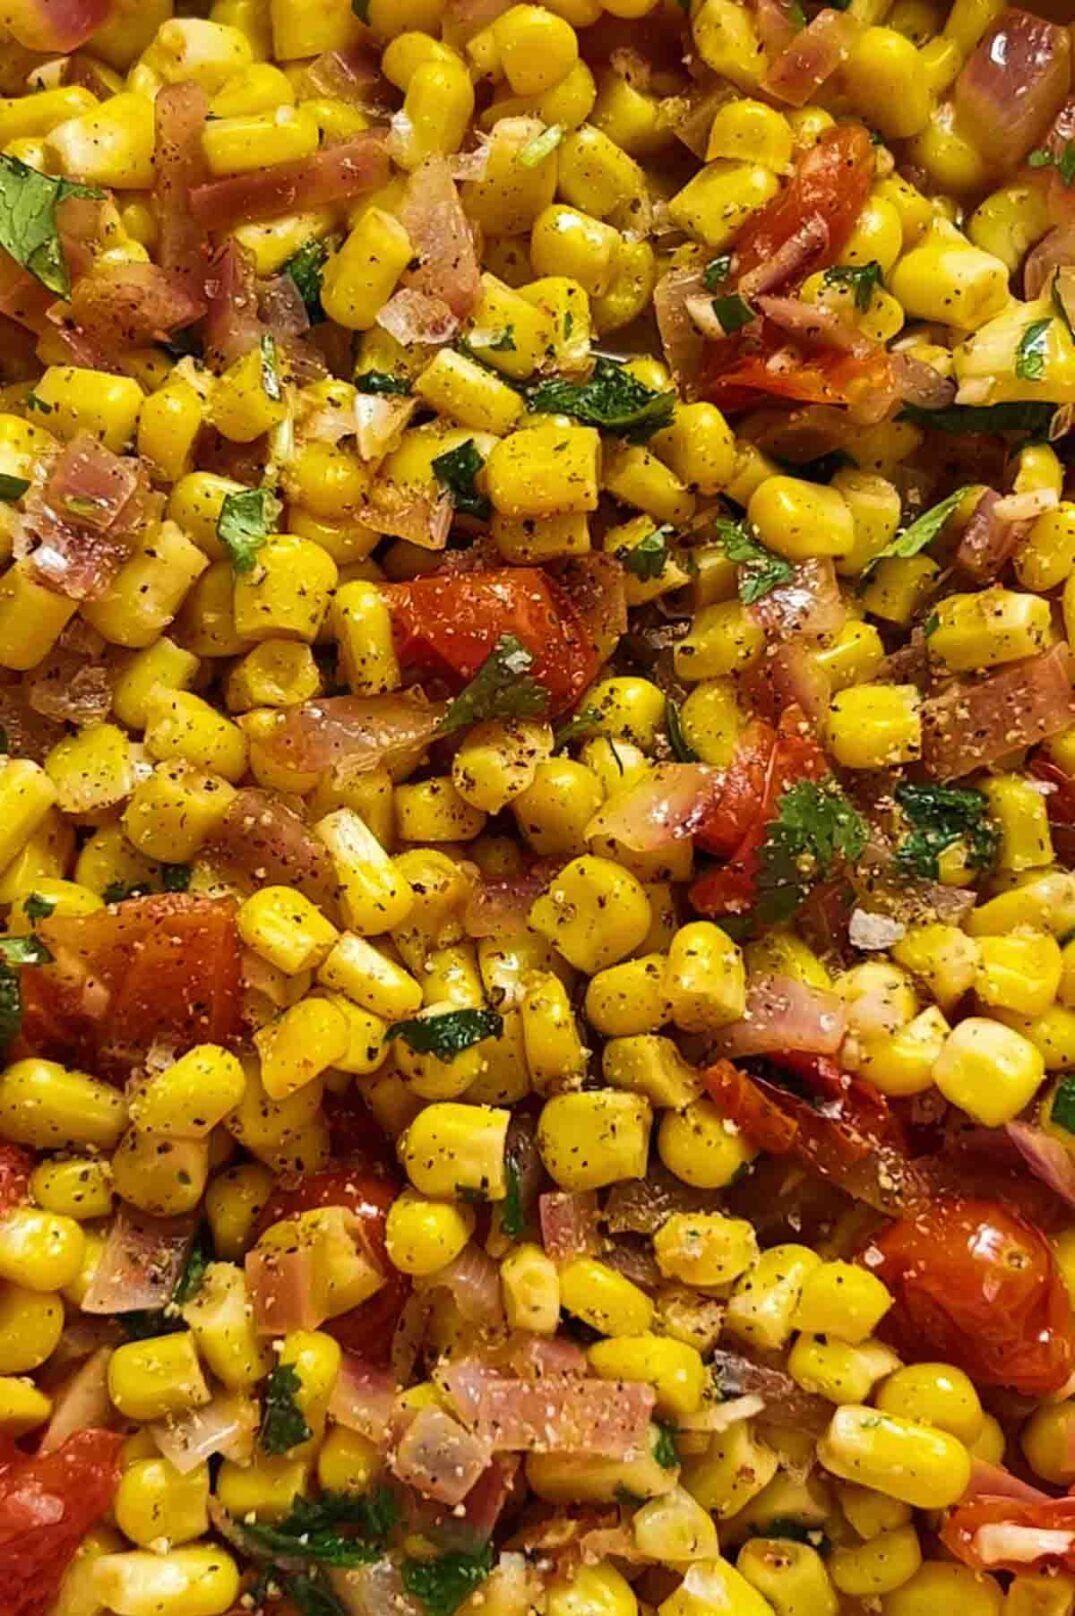 an up close view of corn kernals from 4 rivers smokehouse corn.